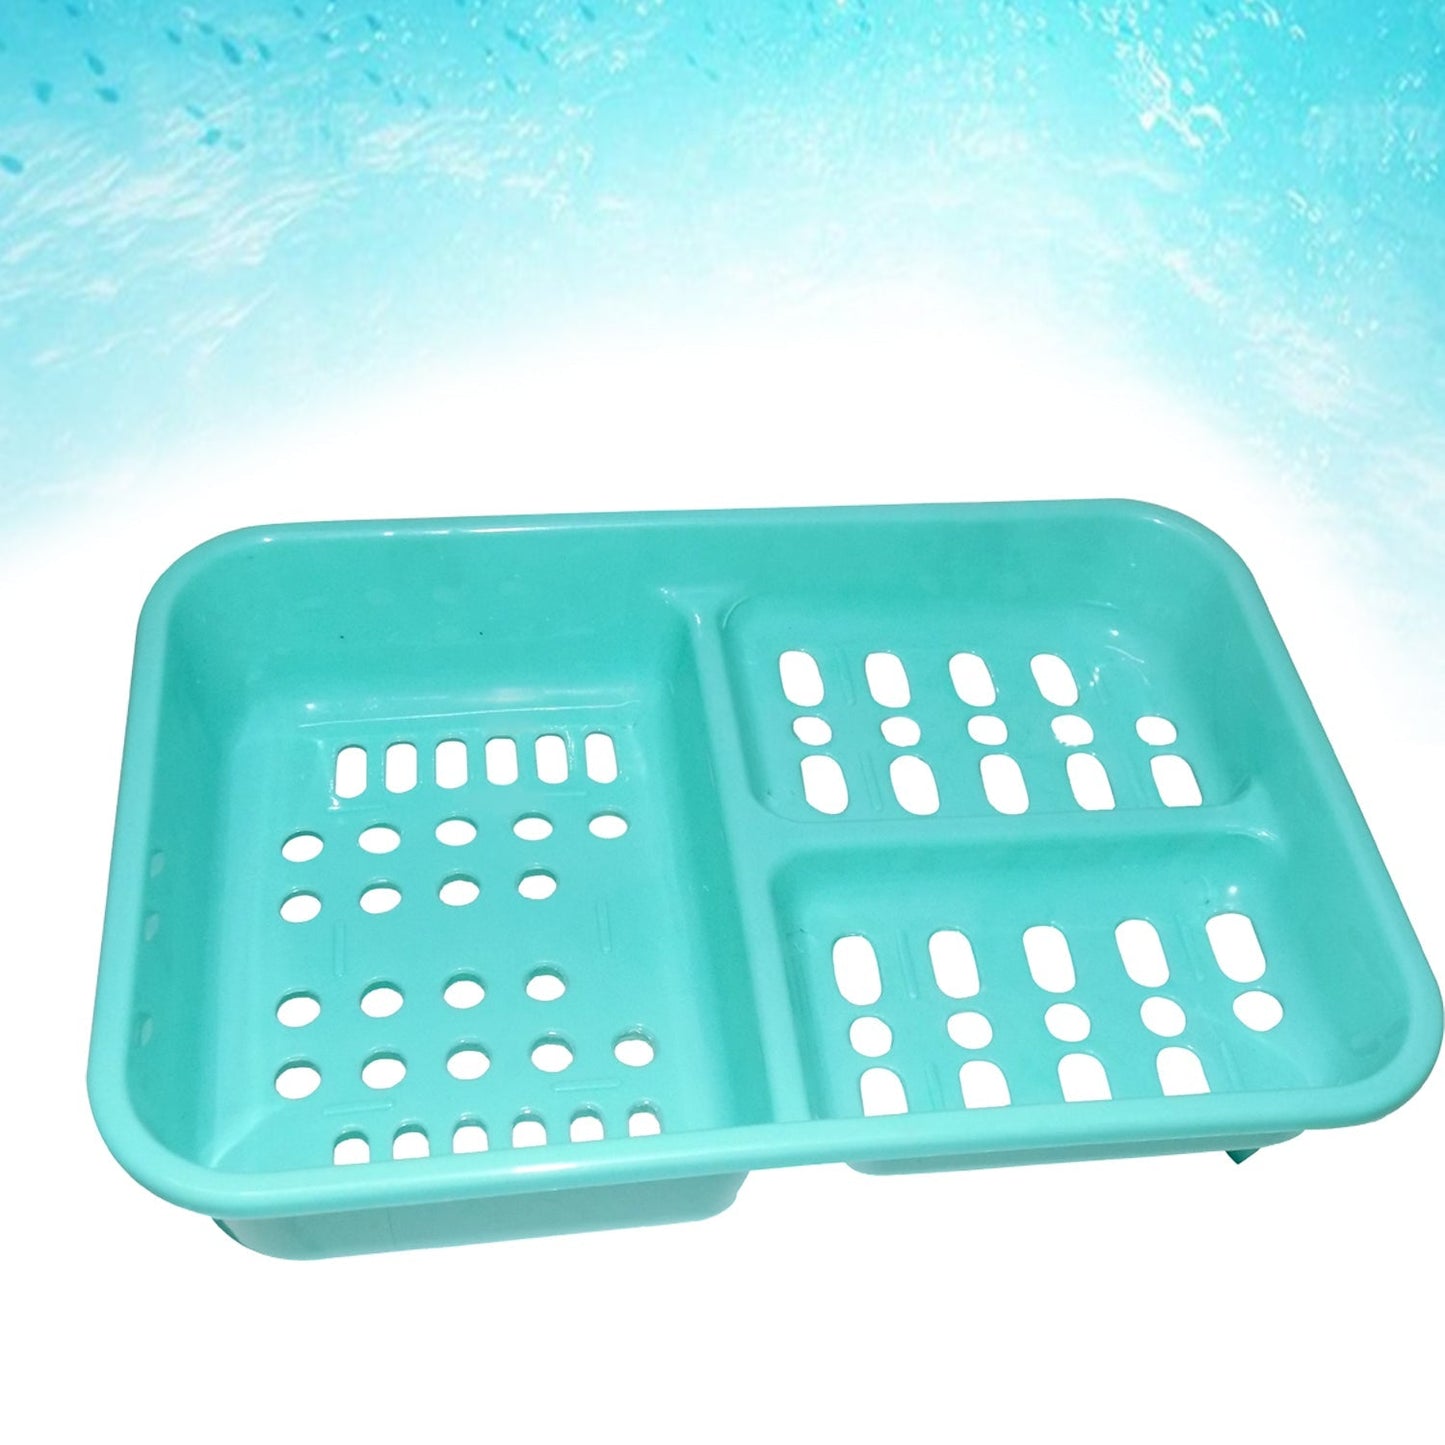 Soap keeping Plastic Case for Bathroom use 3in1